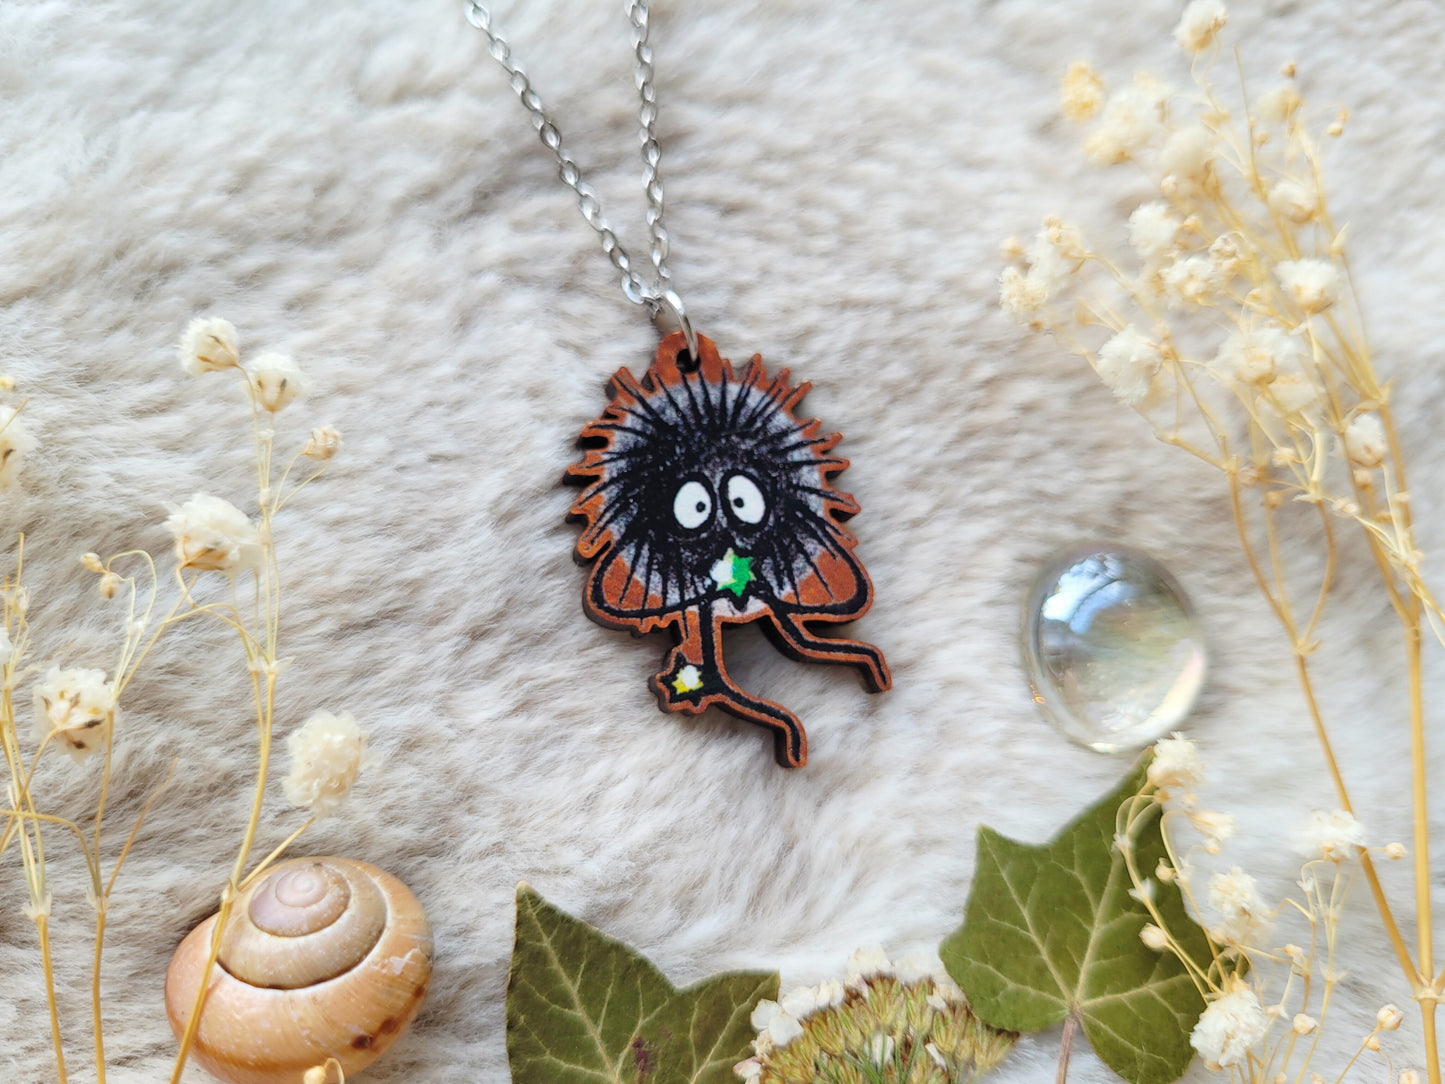 Soot Sprite Illustrated necklace, green star, anime inspired, responsibly sourced cherry wood, chain options available, by Grace Moth